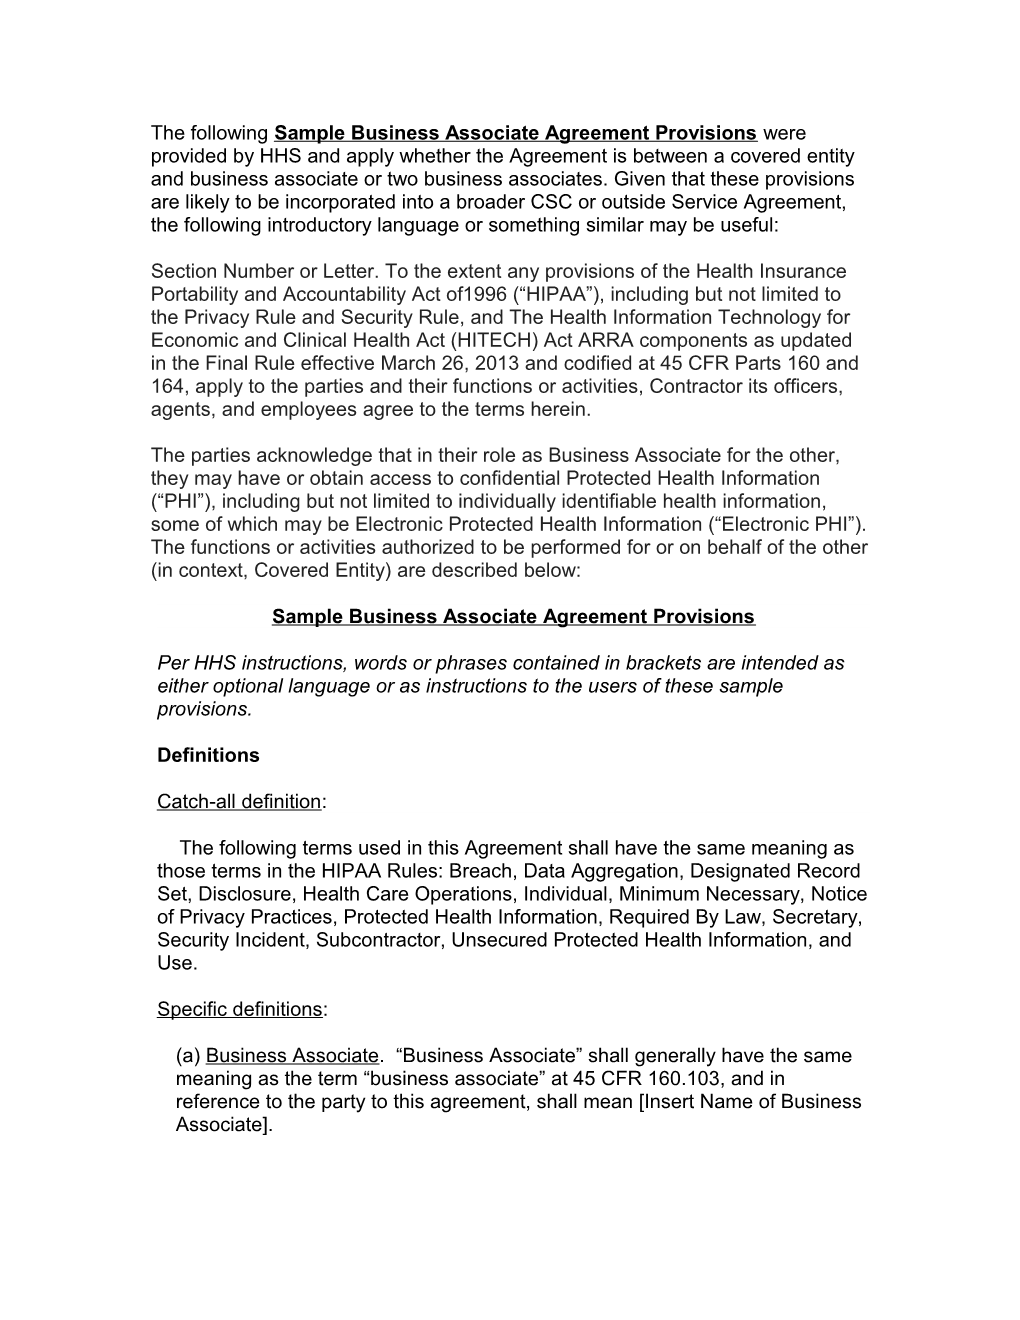 Sample Business Associate Agreement Provisions